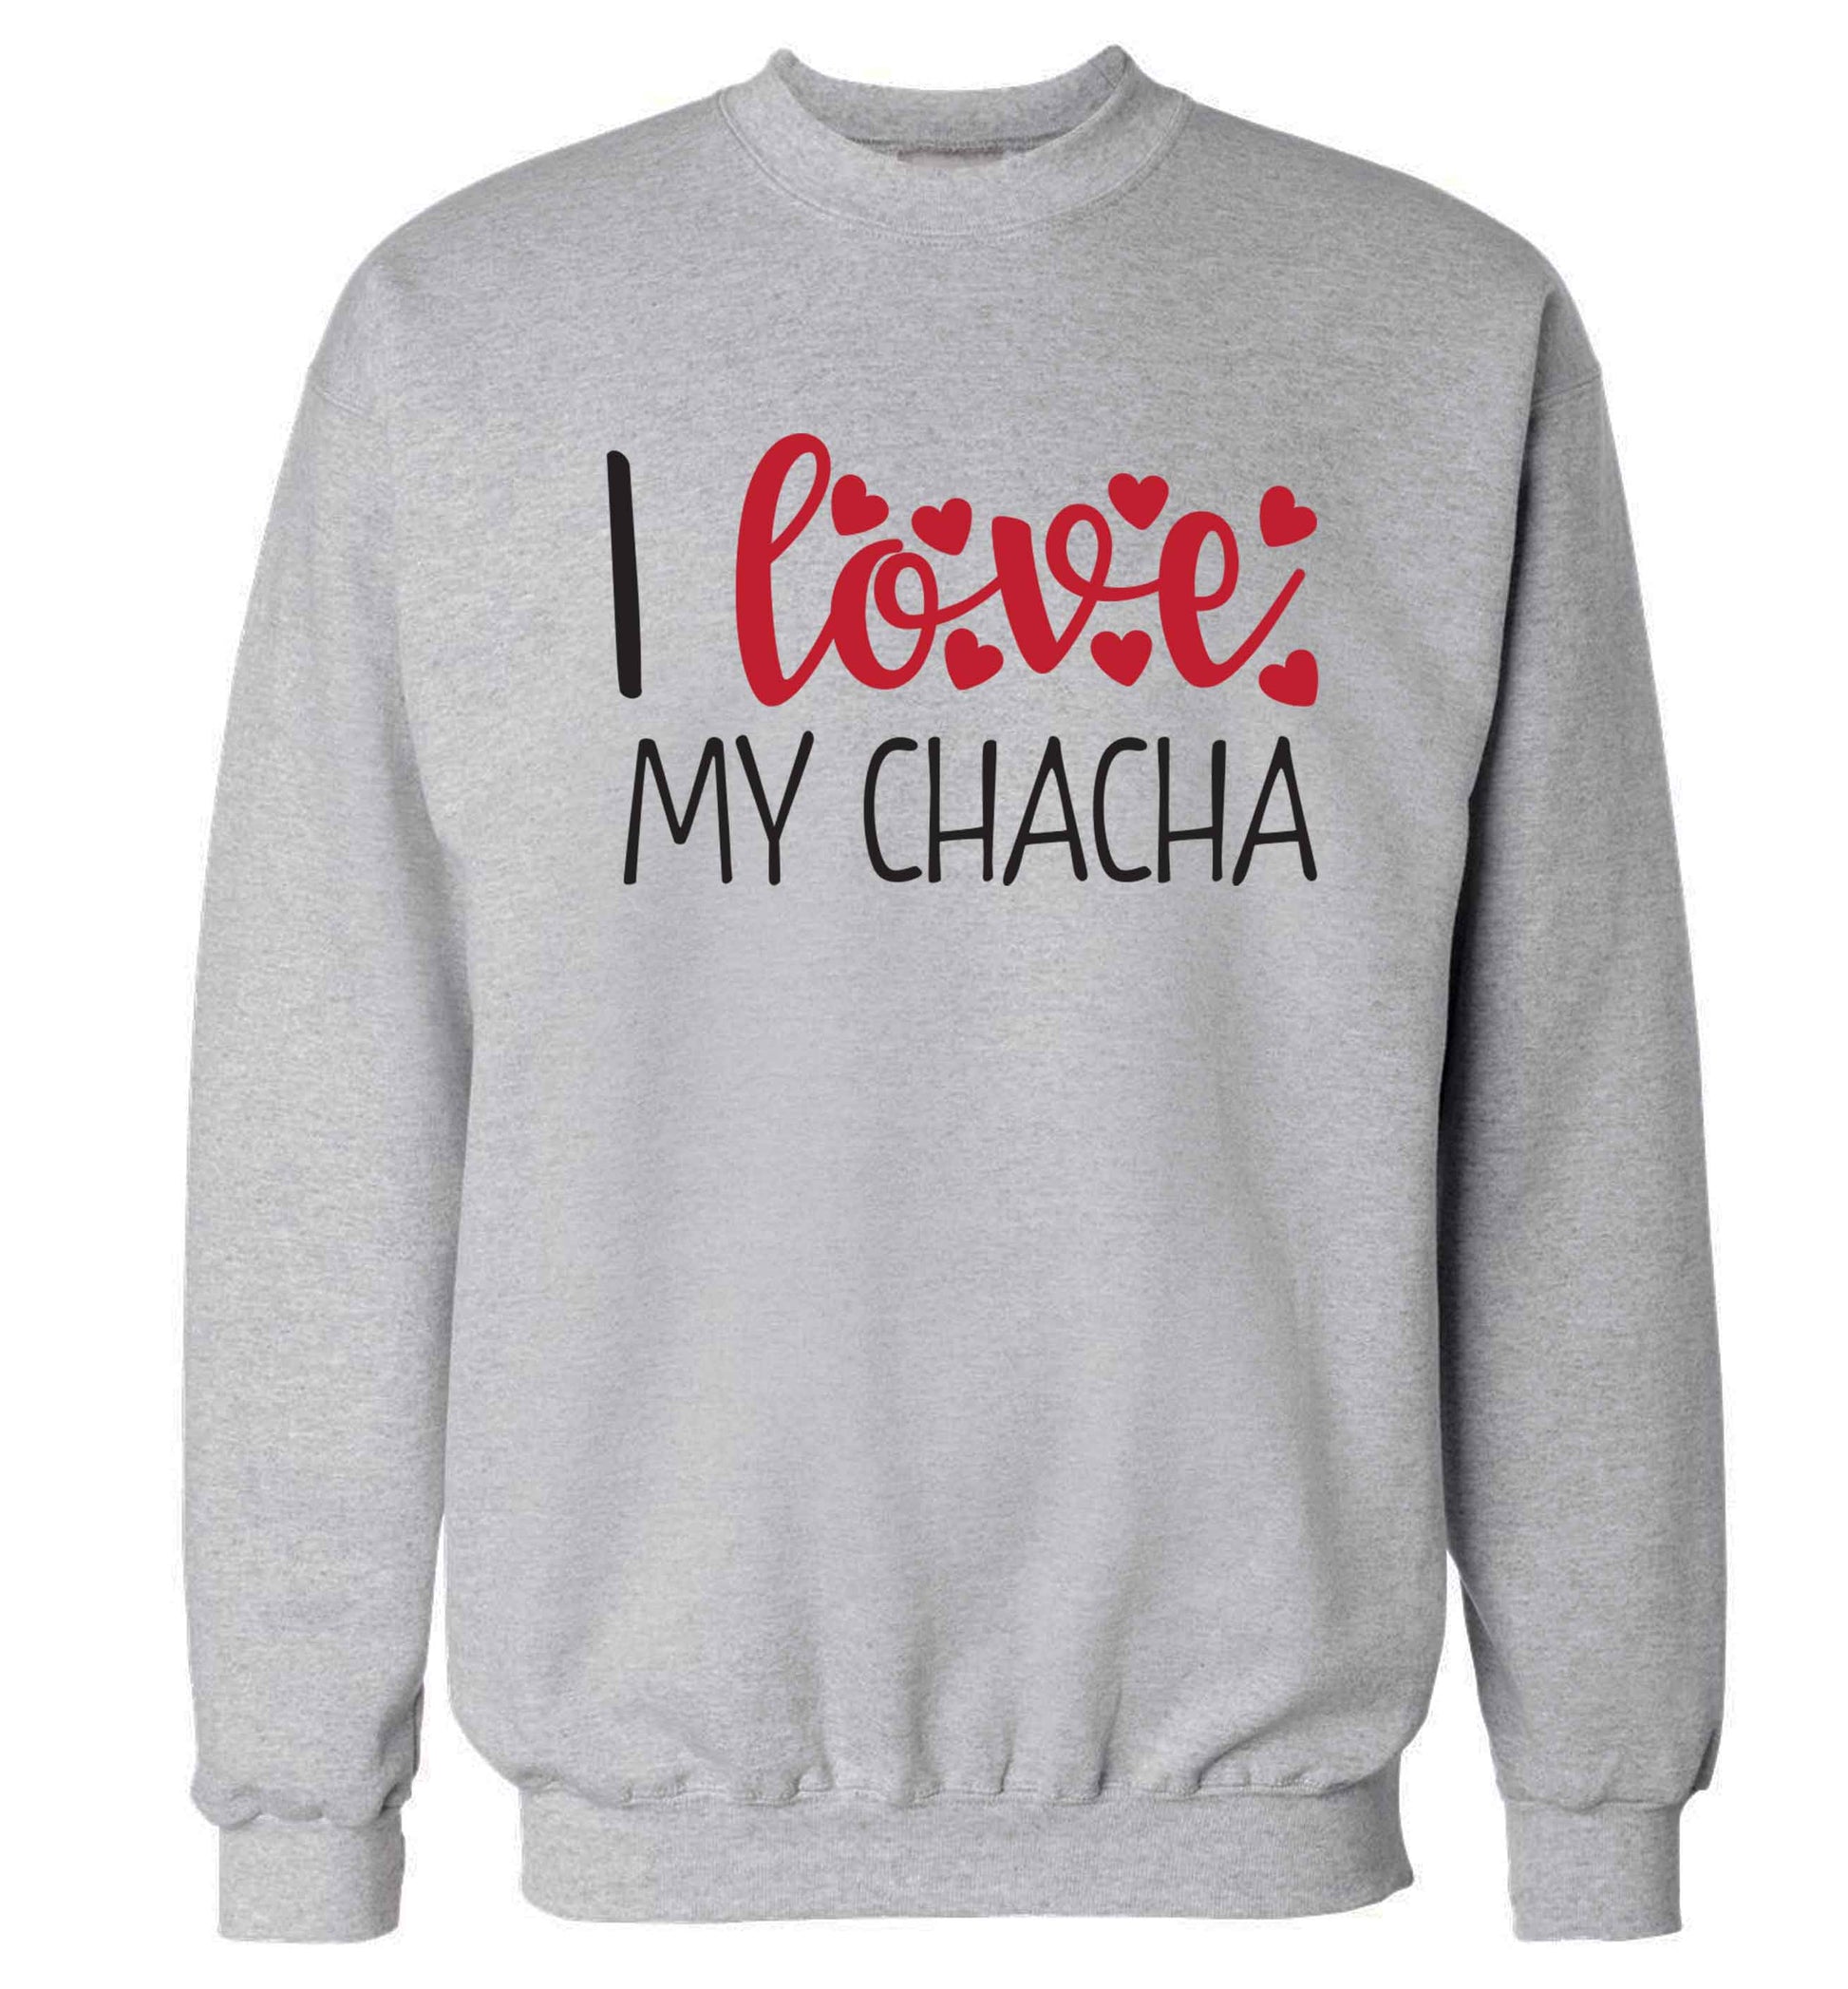 I love my chacha Adult's unisex grey Sweater 2XL